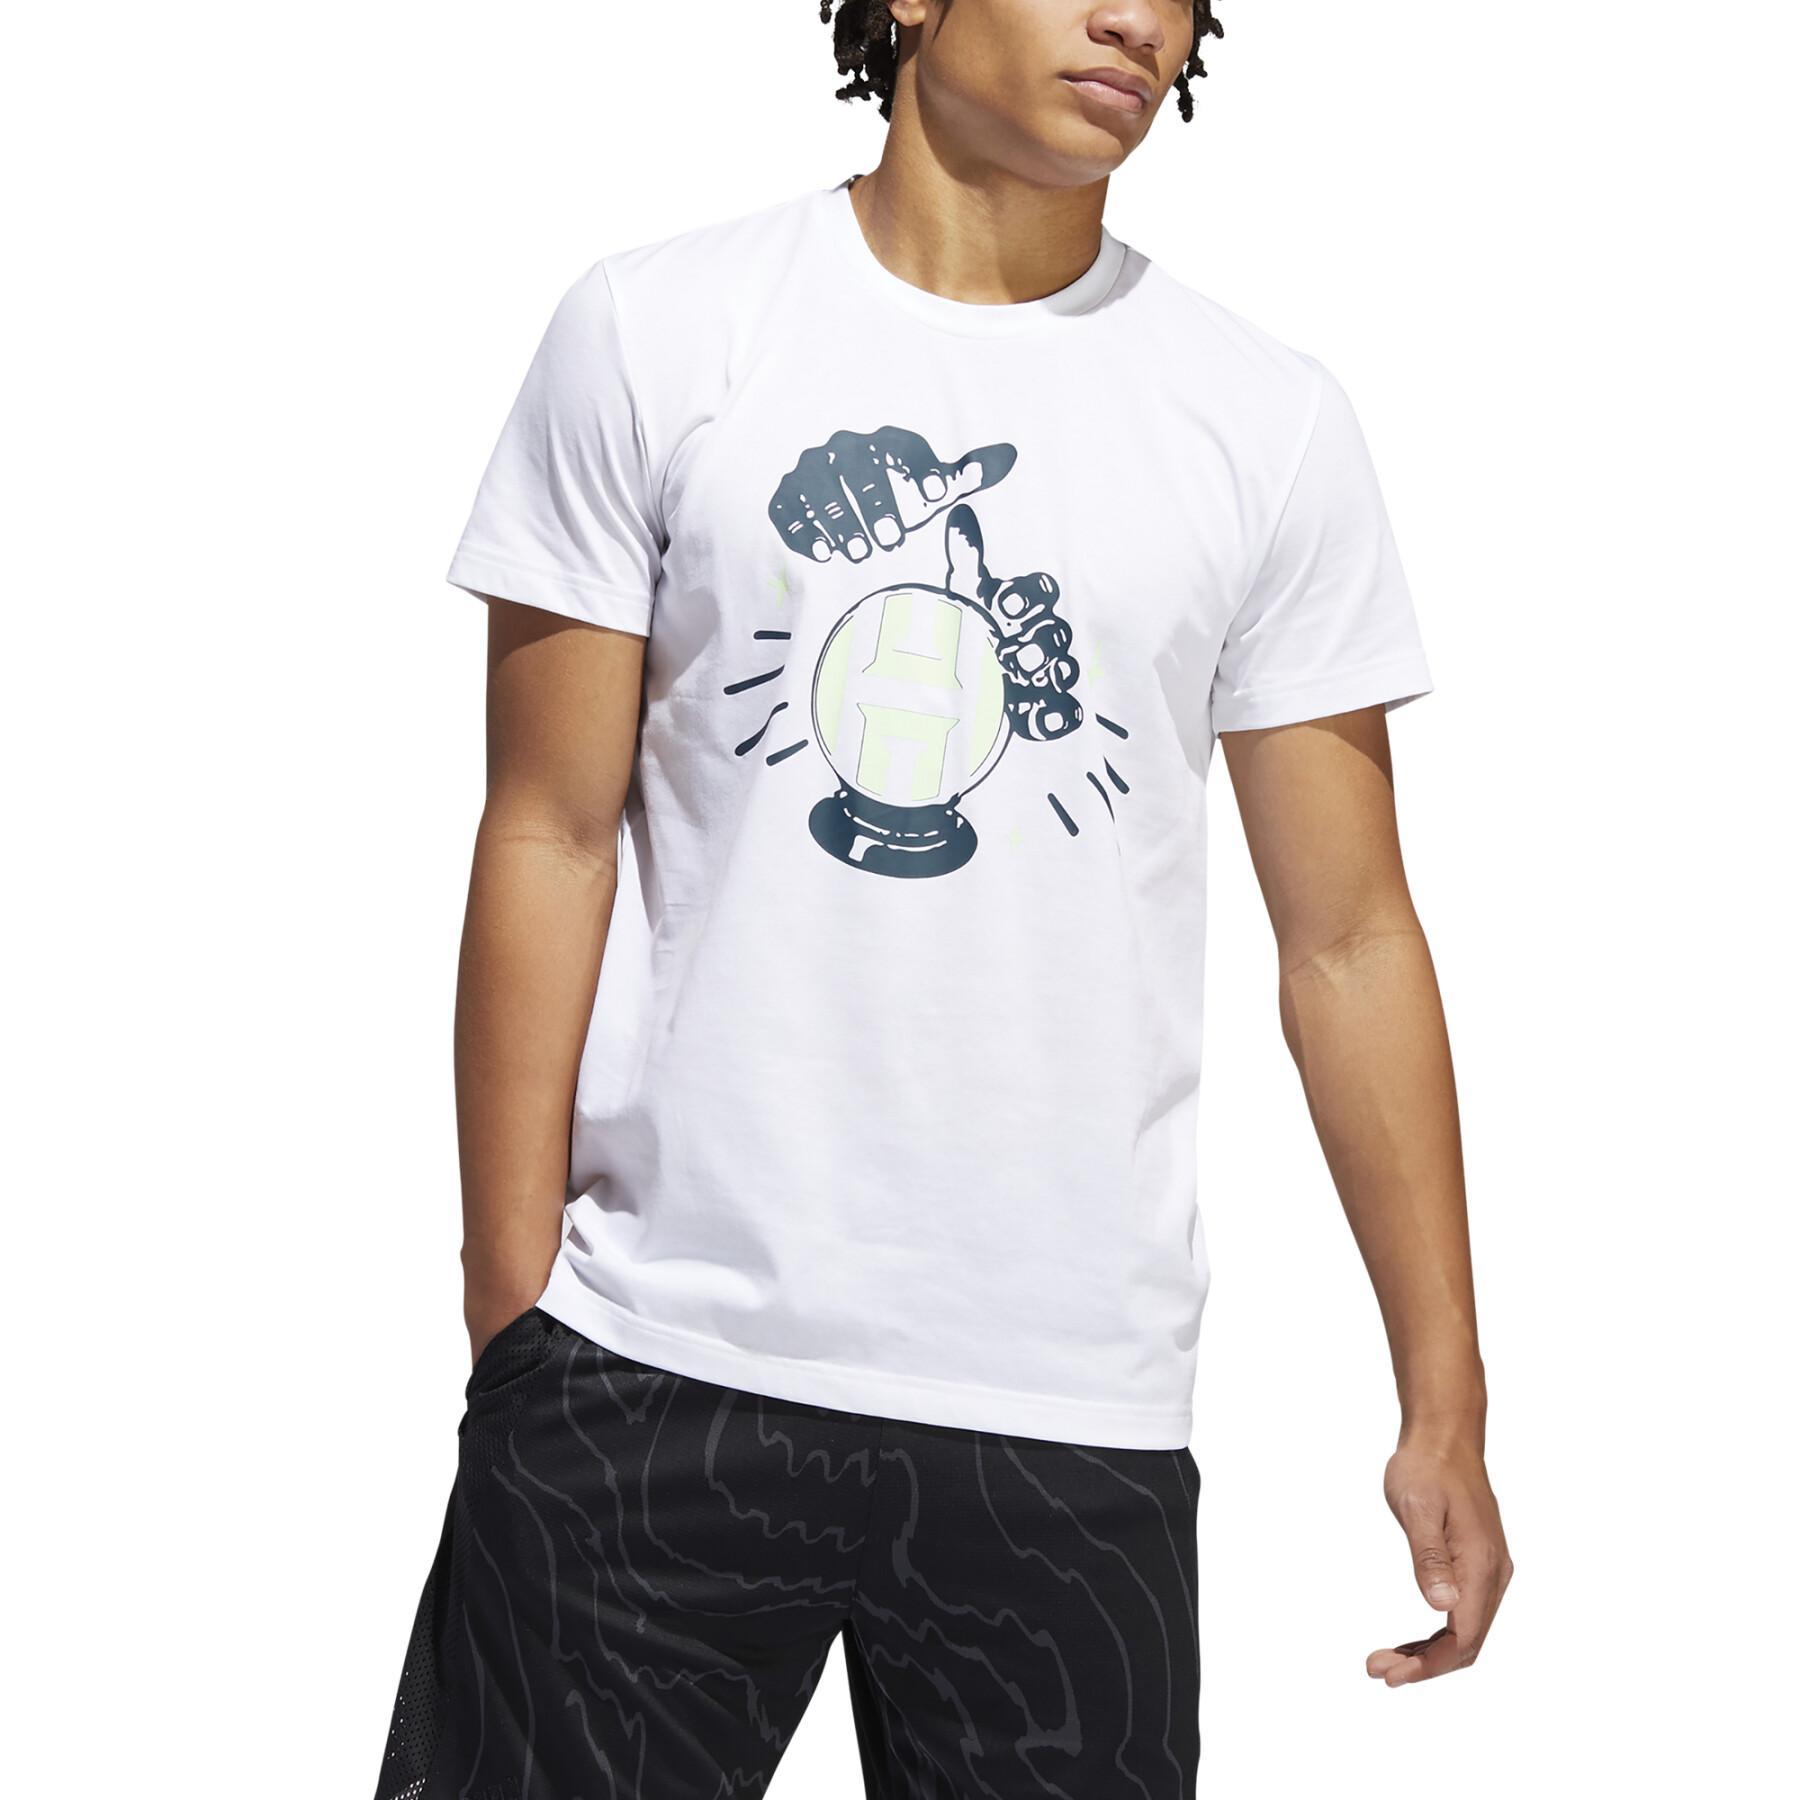 T-shirt adidas Harden Swagger Verb